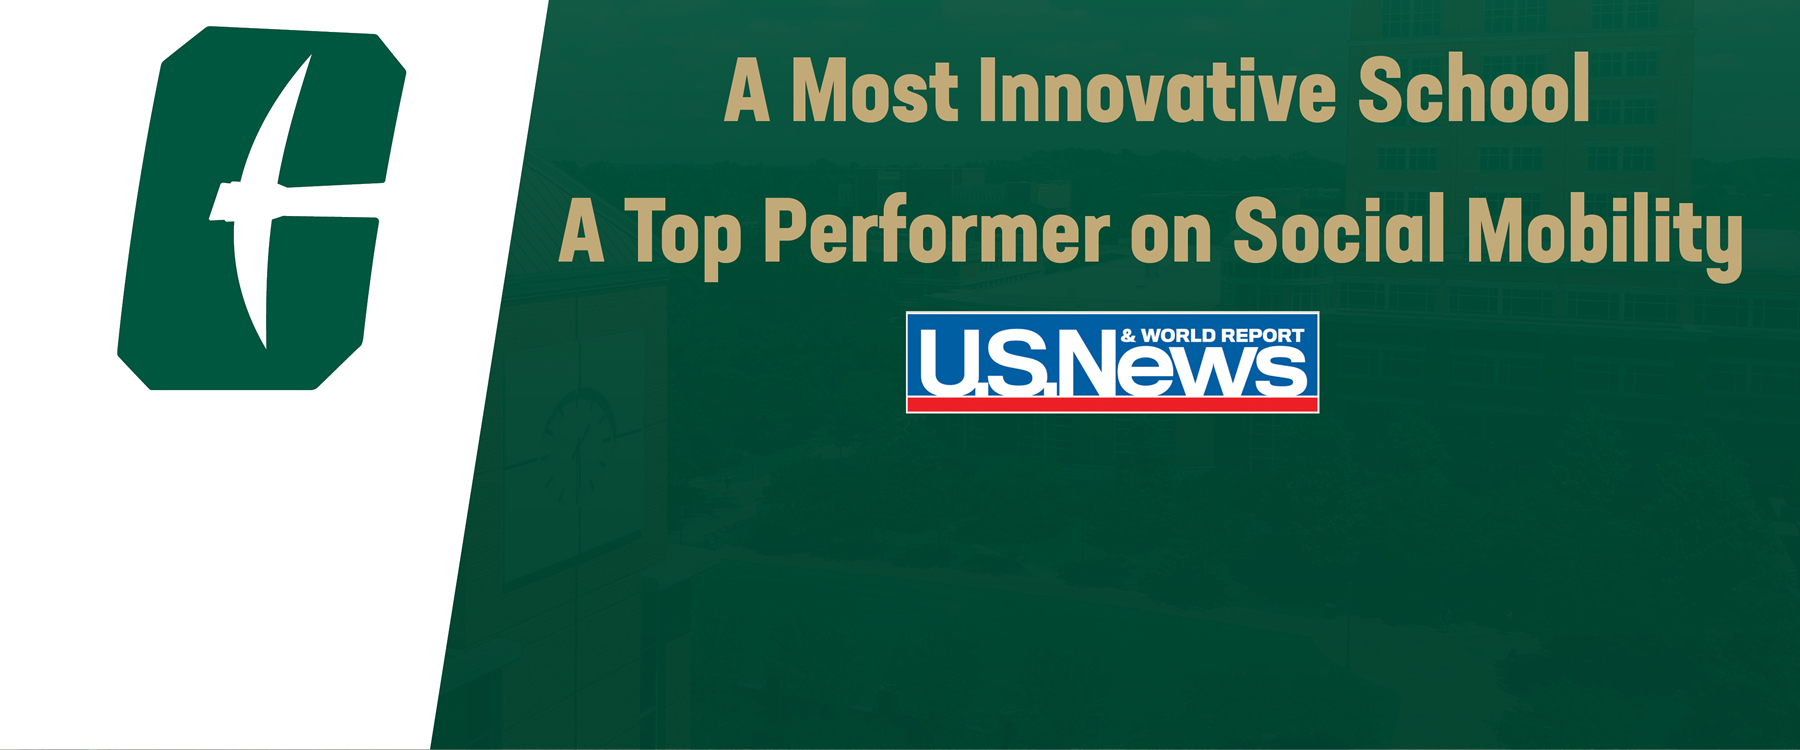 UNC Charlotte recognized nationally for excellence in innovation, social mobility by U.S. News and World Report